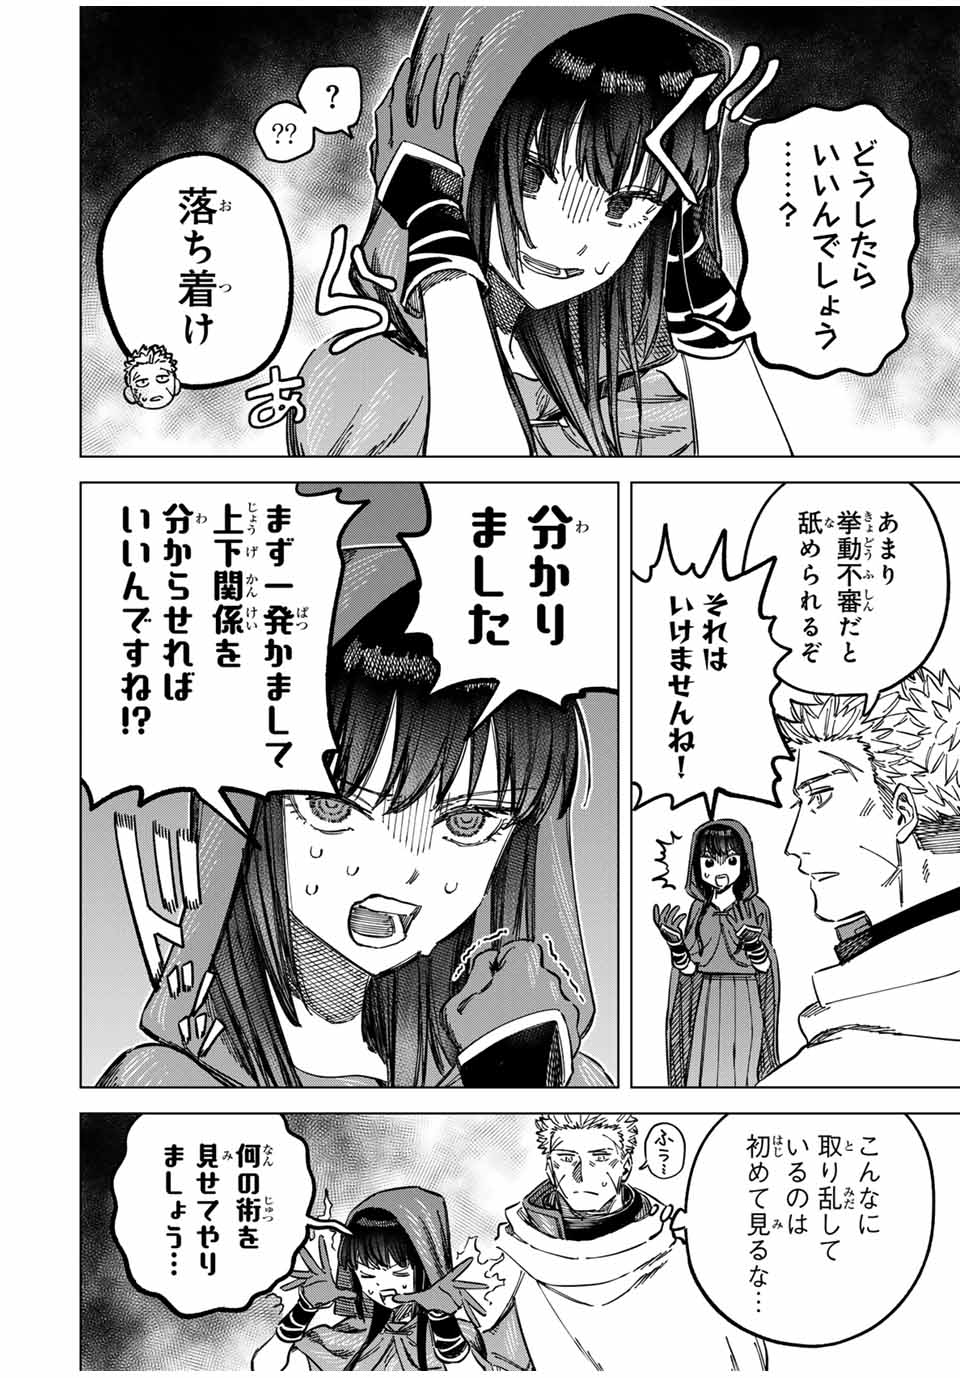 Witch and Mercenary 魔女と傭兵 第5.1話 - Page 2